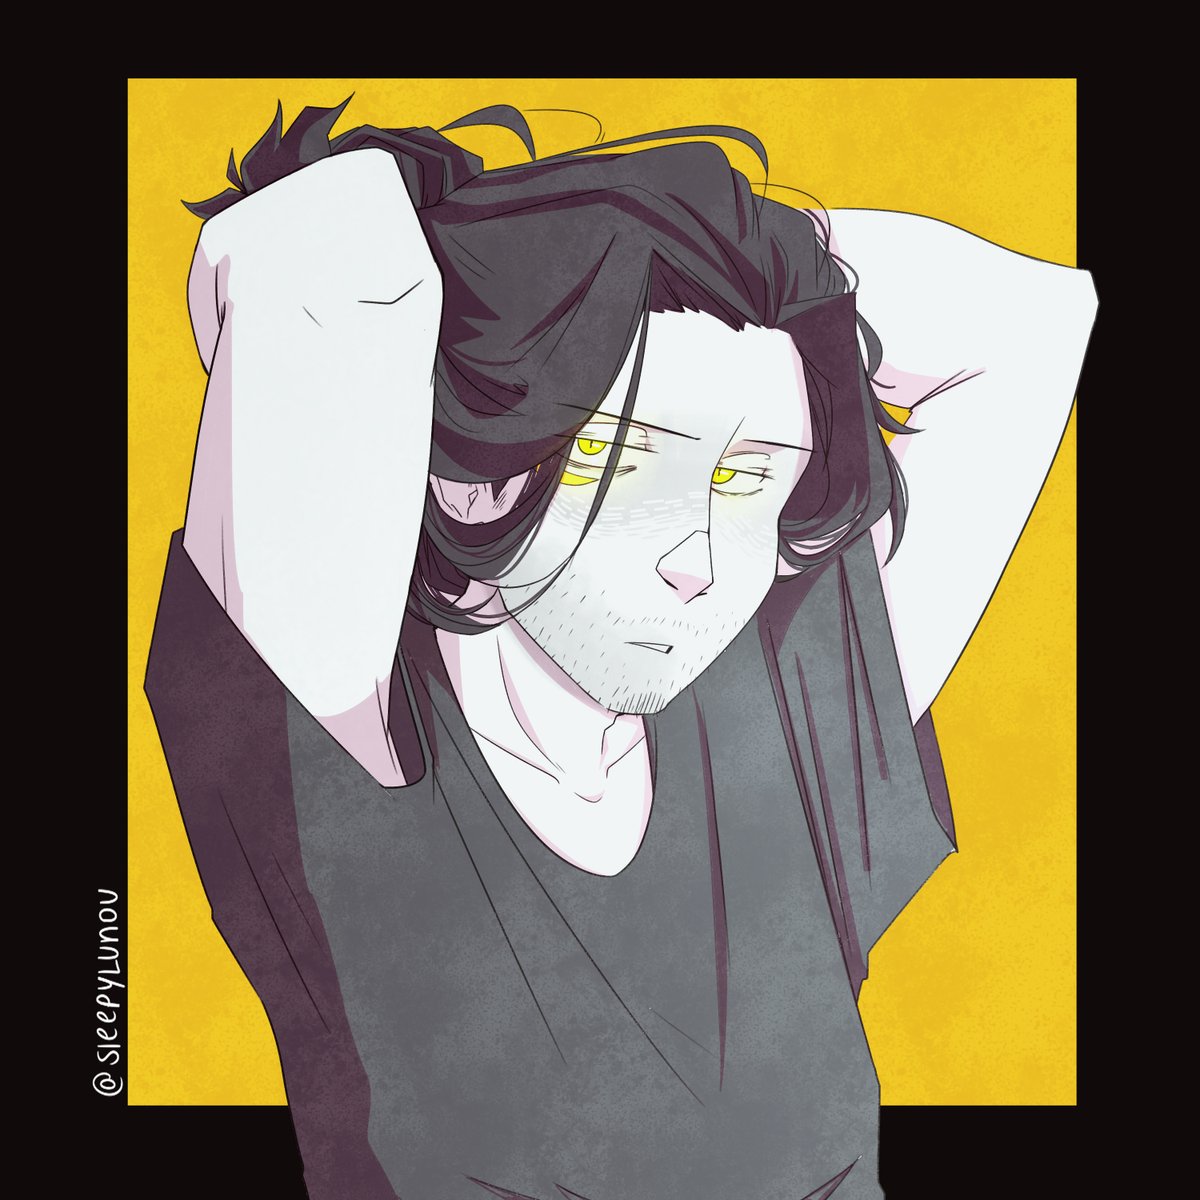 Golden eyes 👁️✨
-
A little thing i did this afternoon,,
Im gonna post this here before Ing cuz [insert reason here] 
and theres 2 version cuz why not.
-
#aizawashota #eraserhead #shotaaizawa #bnha #mha #BokuNoHeroAcademia